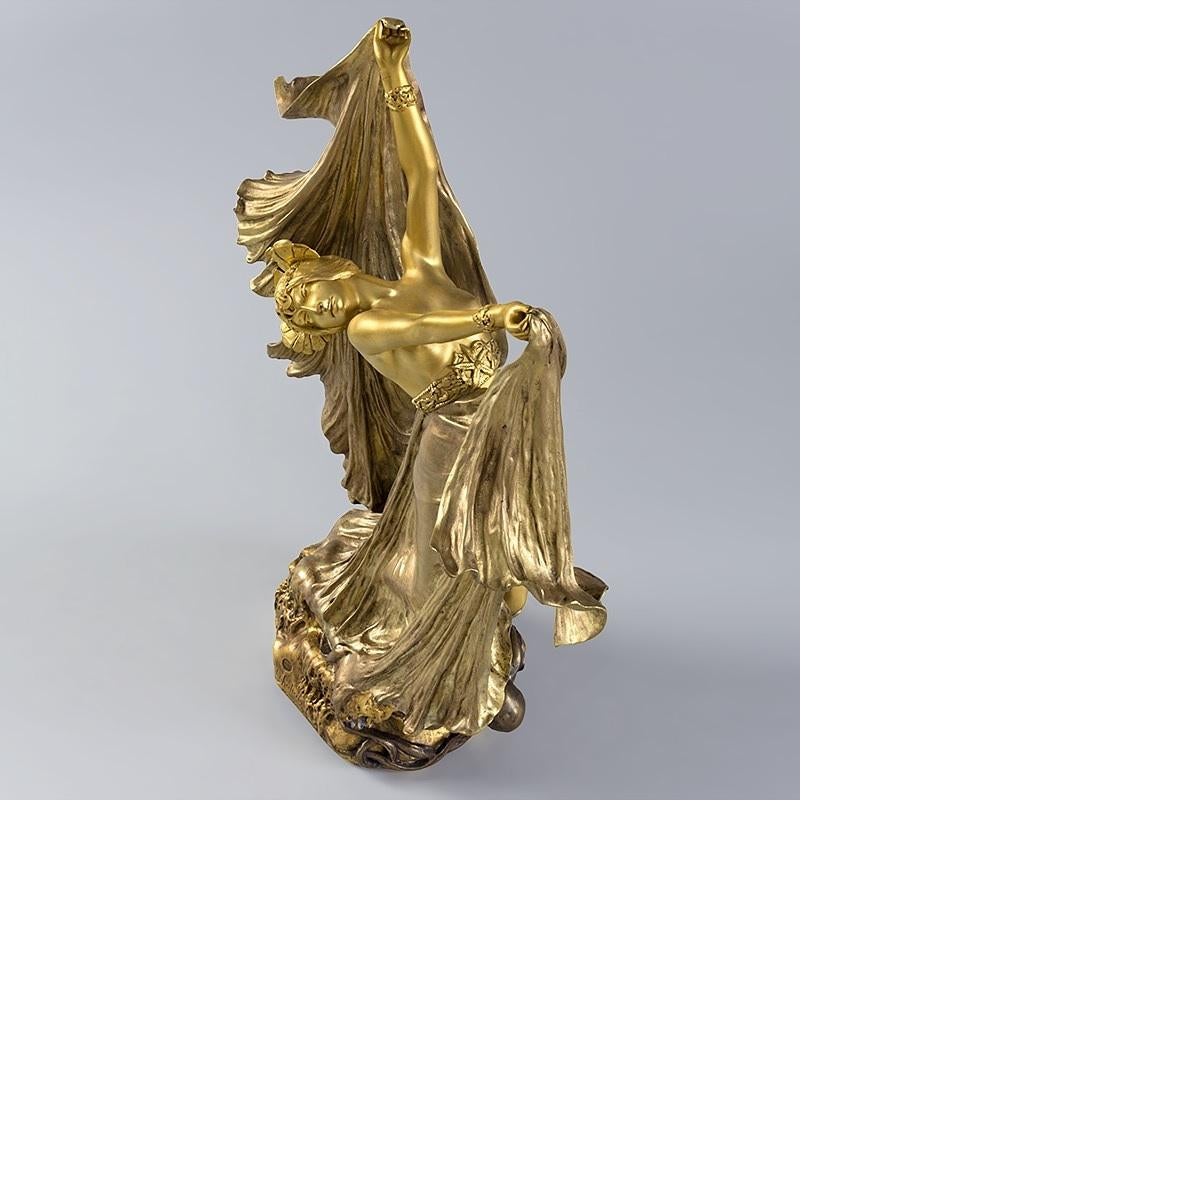 This gilt bronze figural sculpture by Louis Chalon depicts a dancing woman with an octopus at her feet, one of its tendrils wrapped intimately around her leg. Her rolling unfurled veils, imbuing her with exoticism, as her free-form dance movement